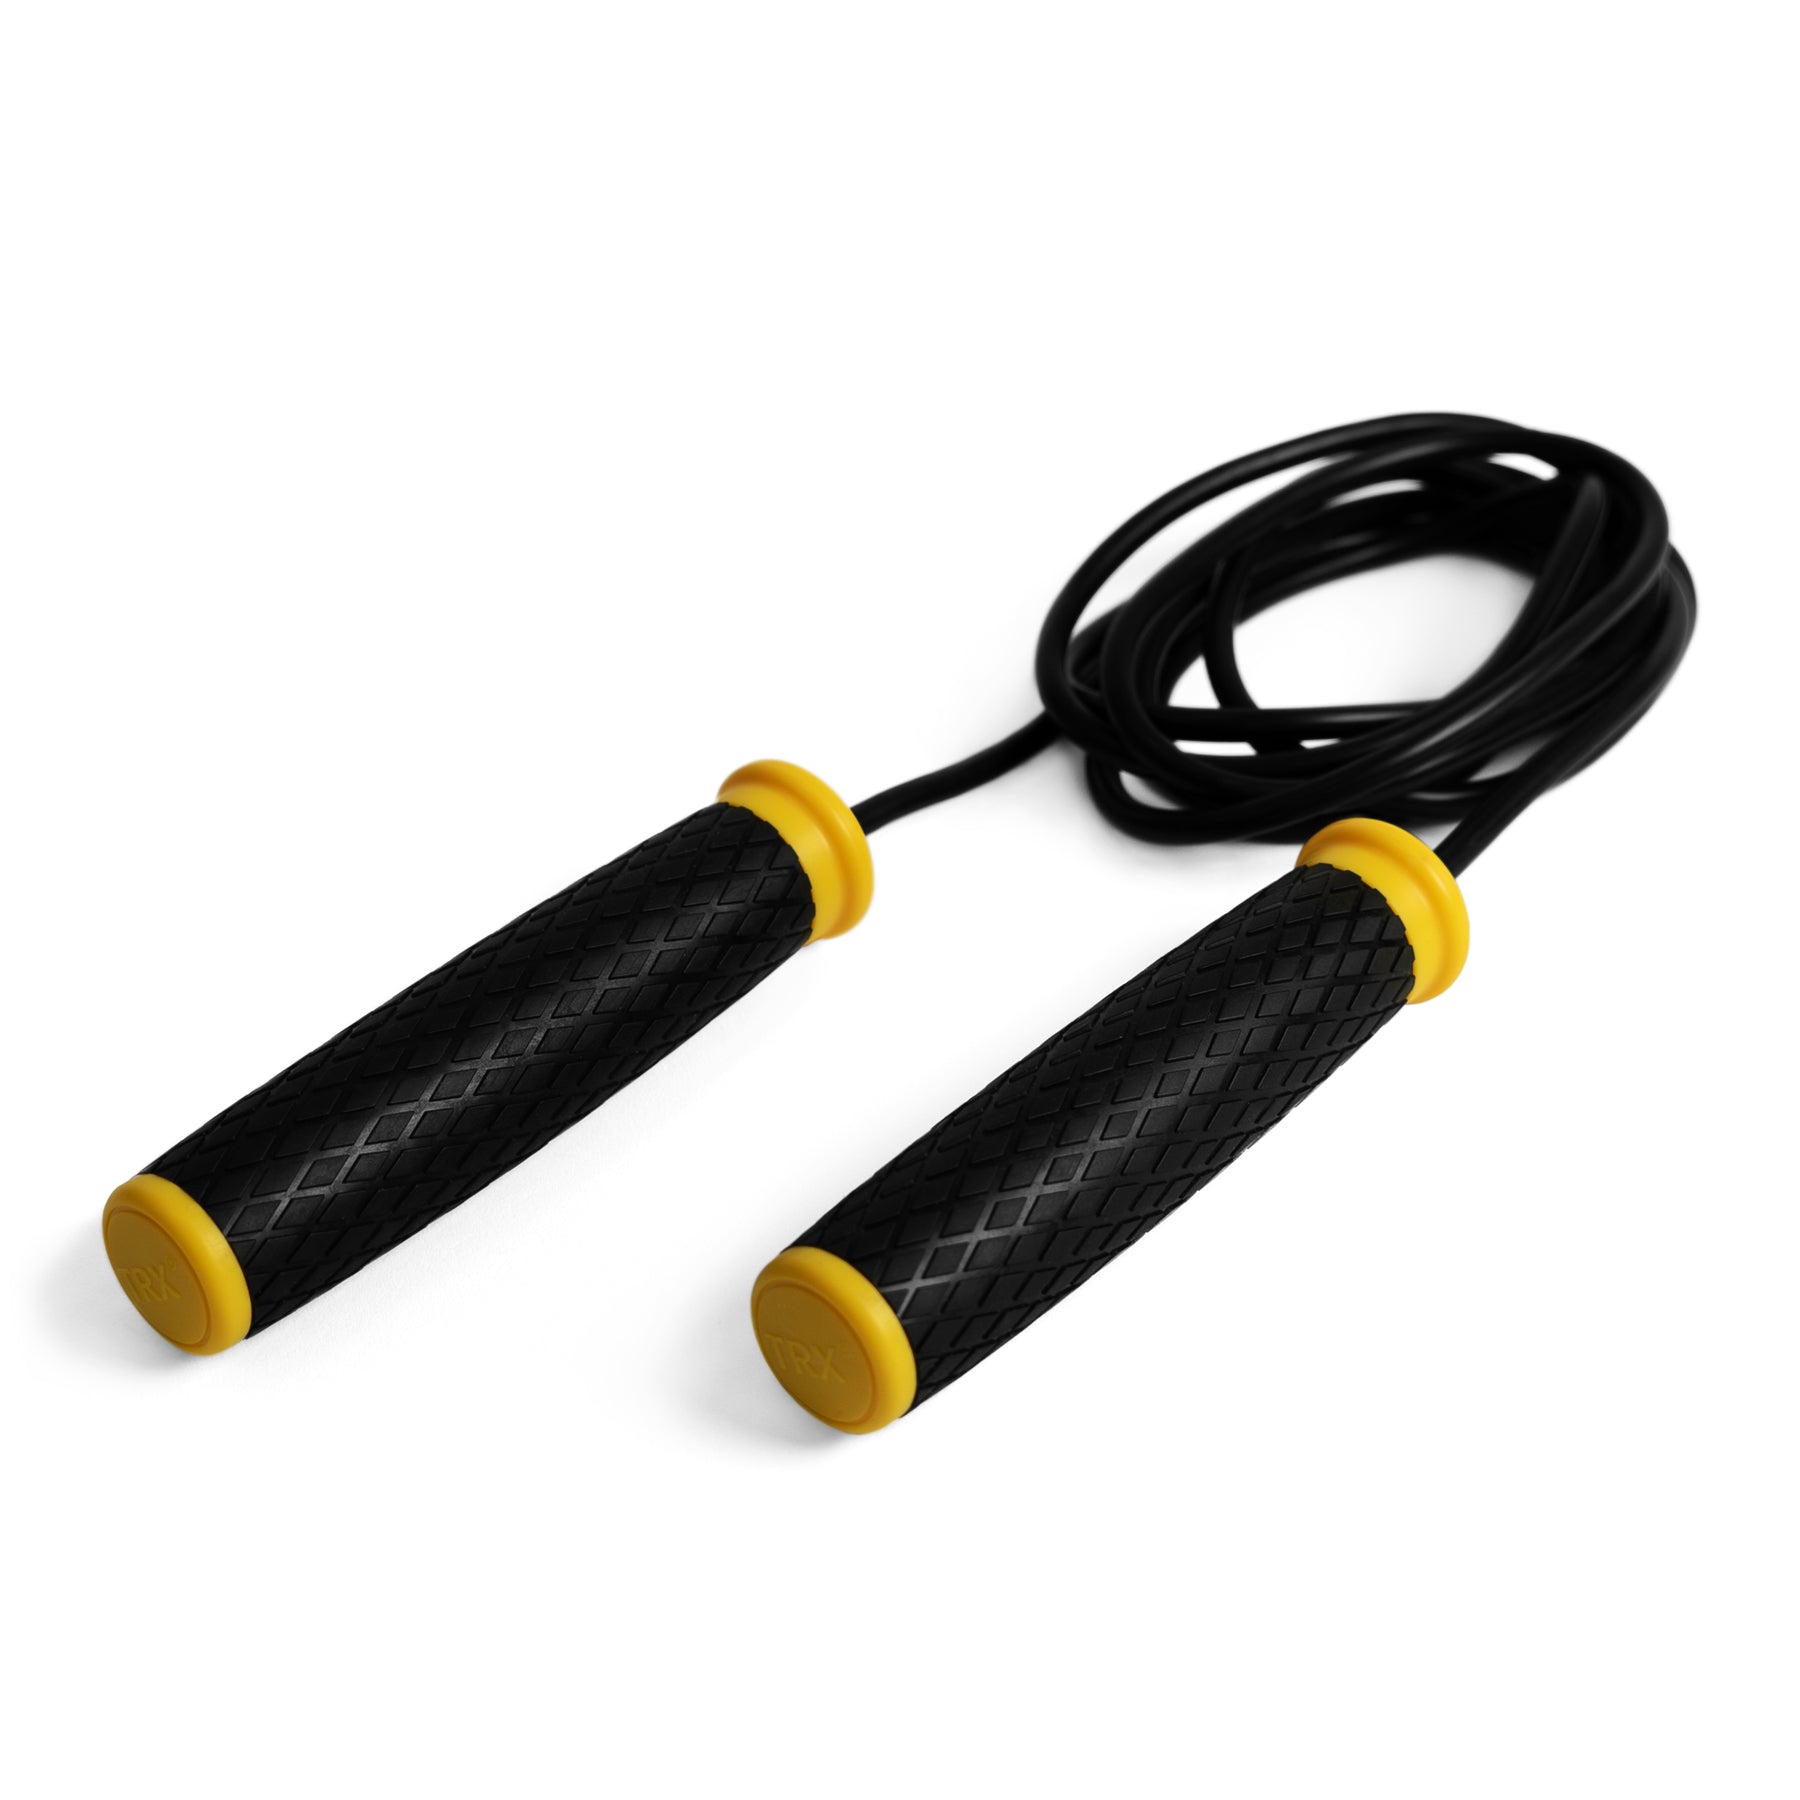 Buy Pro Fitness Weighted Skipping Rope, Skipping ropes